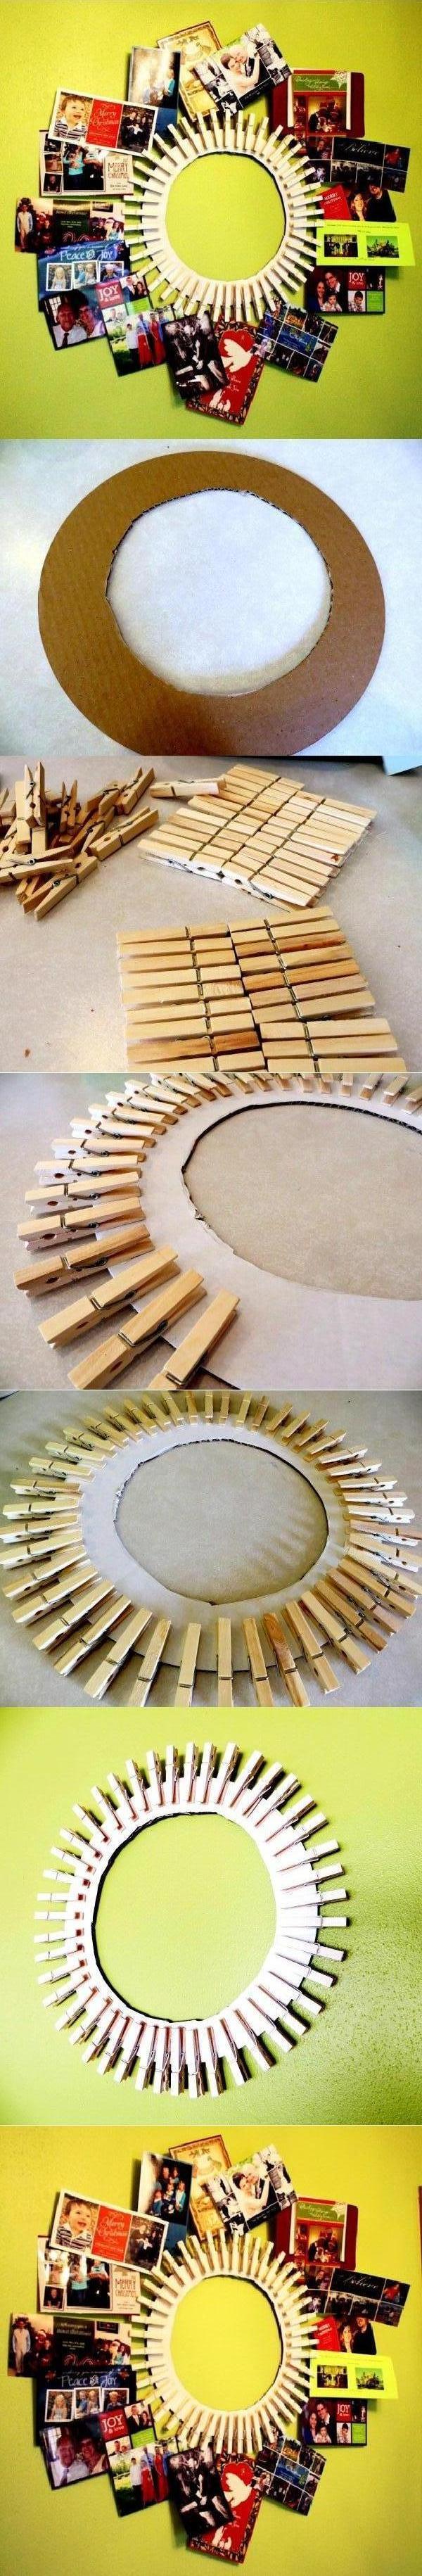 DIY Clothespin Picture Frame